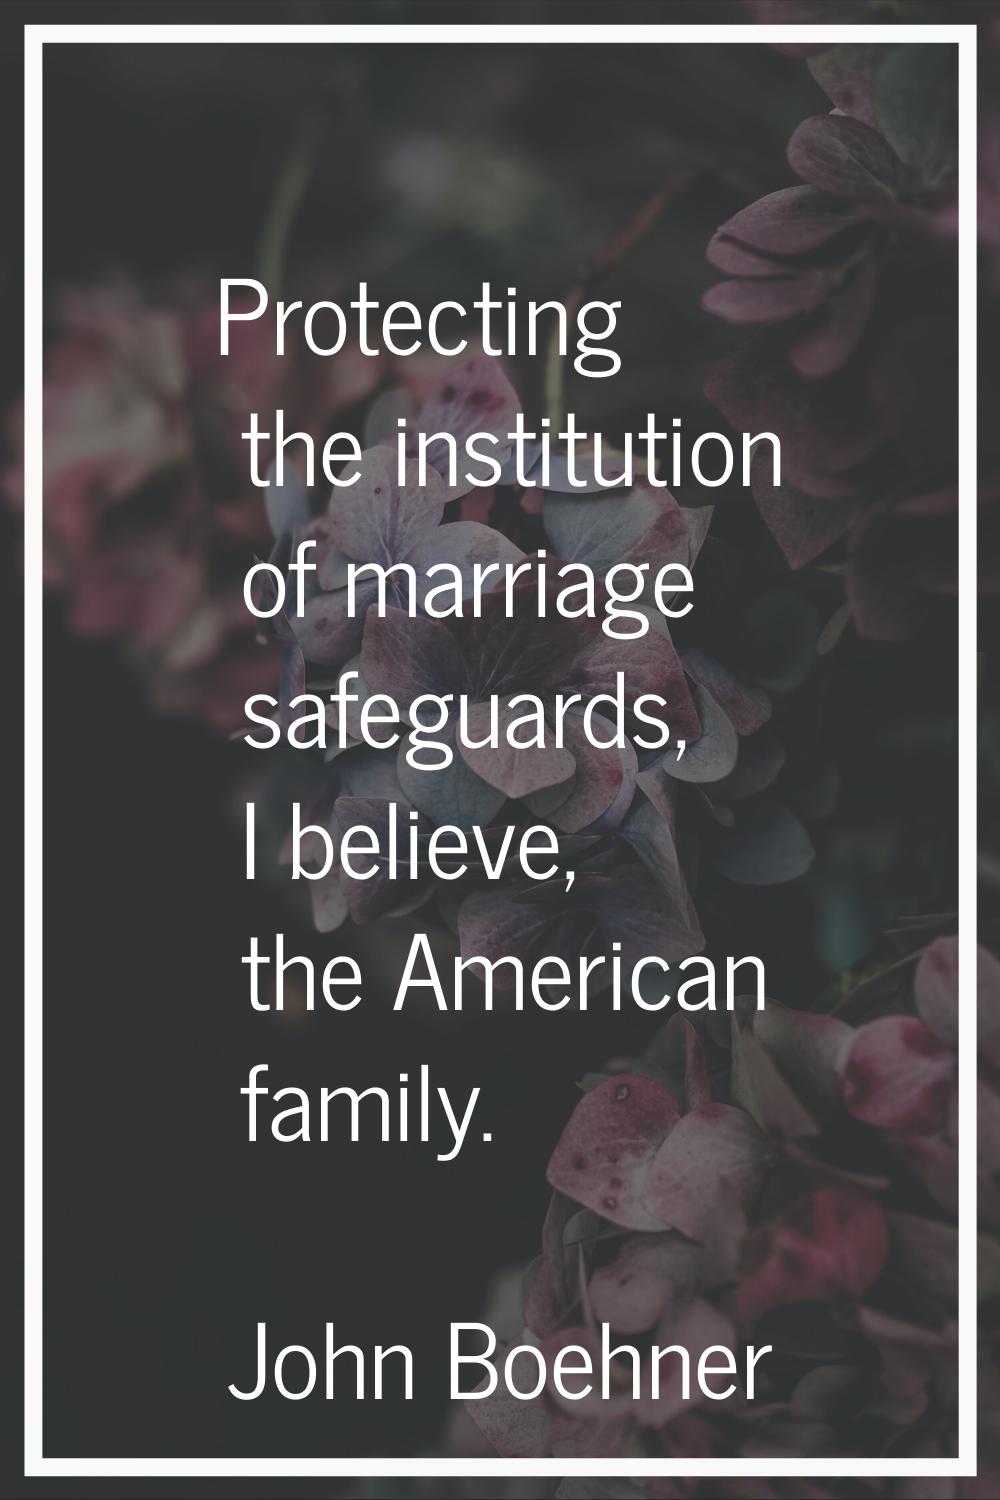 Protecting the institution of marriage safeguards, I believe, the American family.